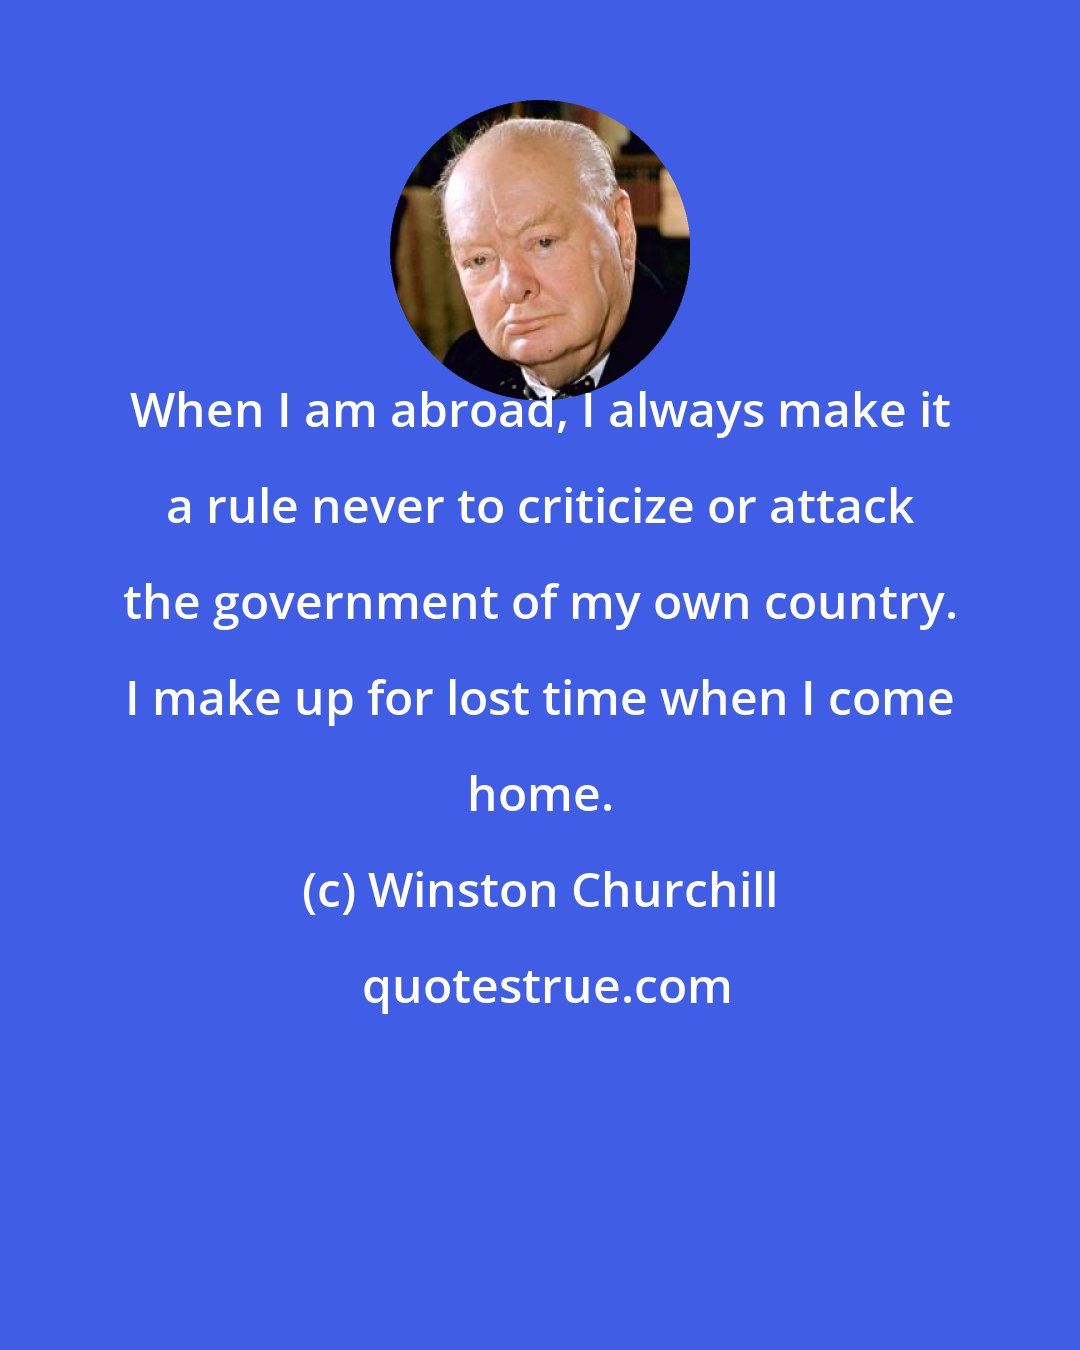 Winston Churchill: When I am abroad, I always make it a rule never to criticize or attack the government of my own country. I make up for lost time when I come home.